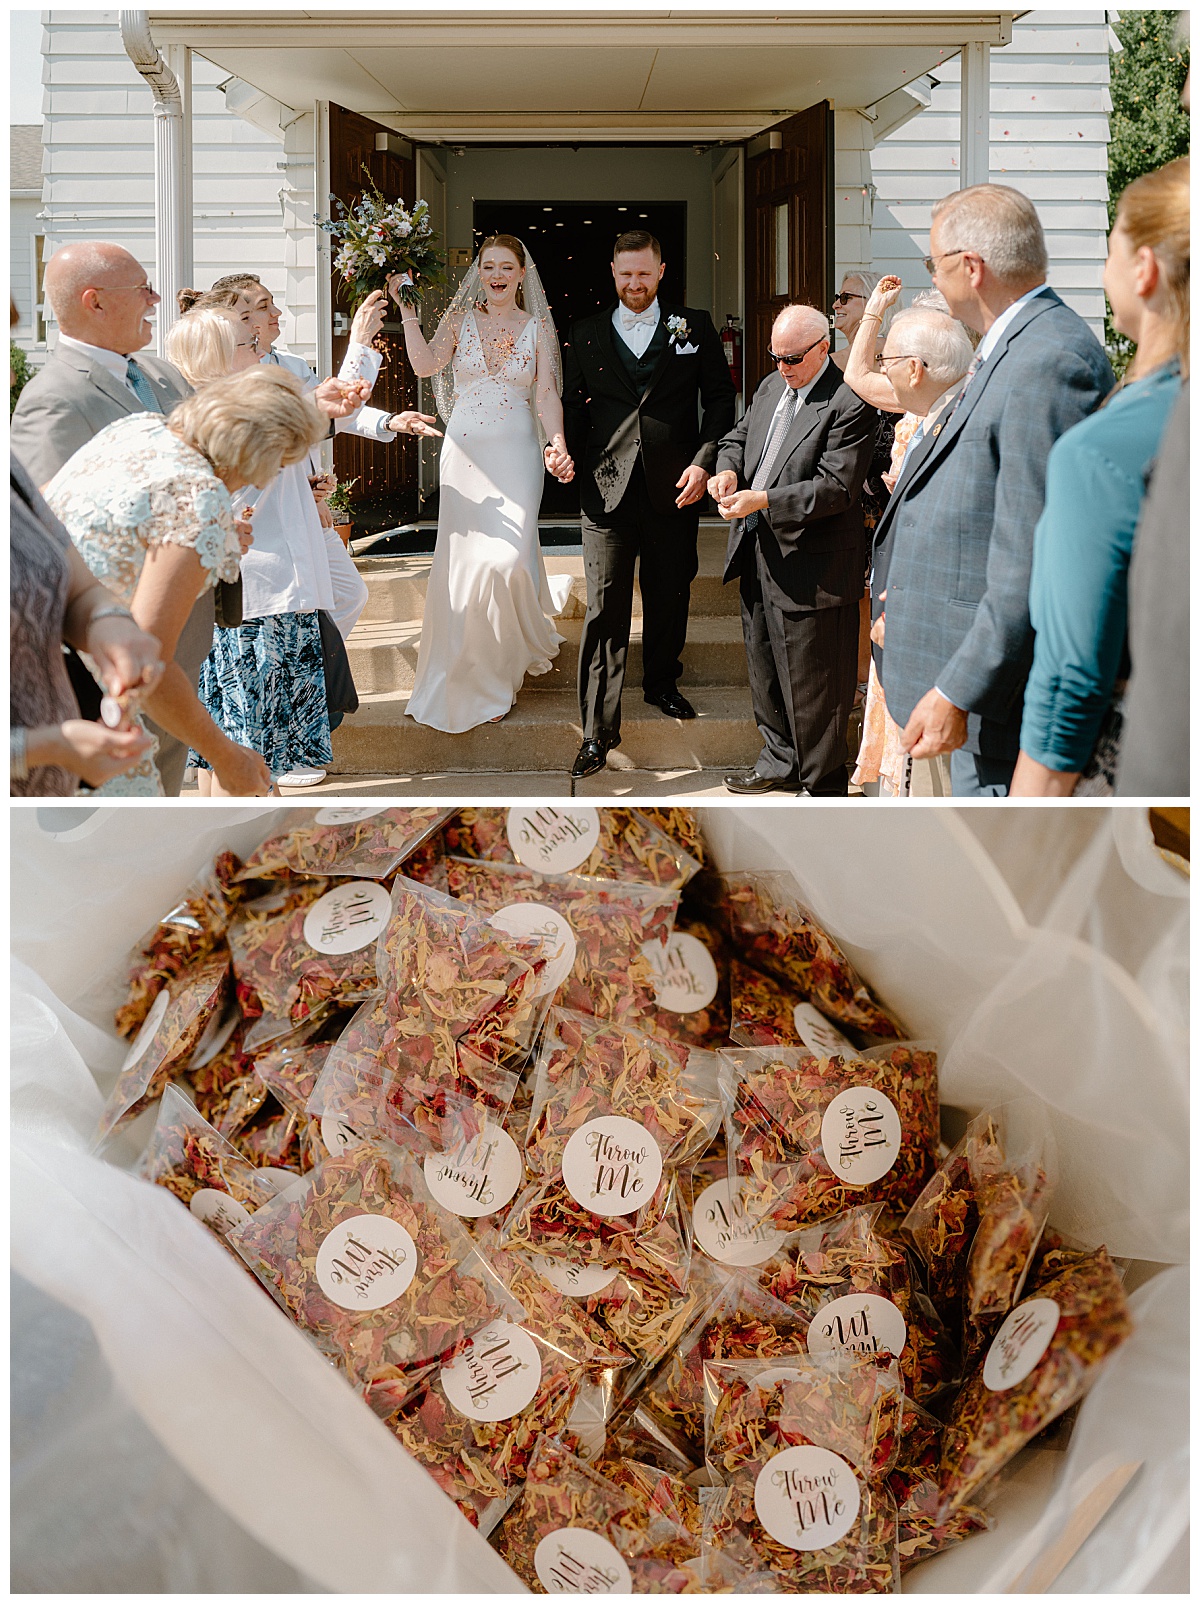 guests throw dried flowers as newlyweds exit church at backyard summer celebration